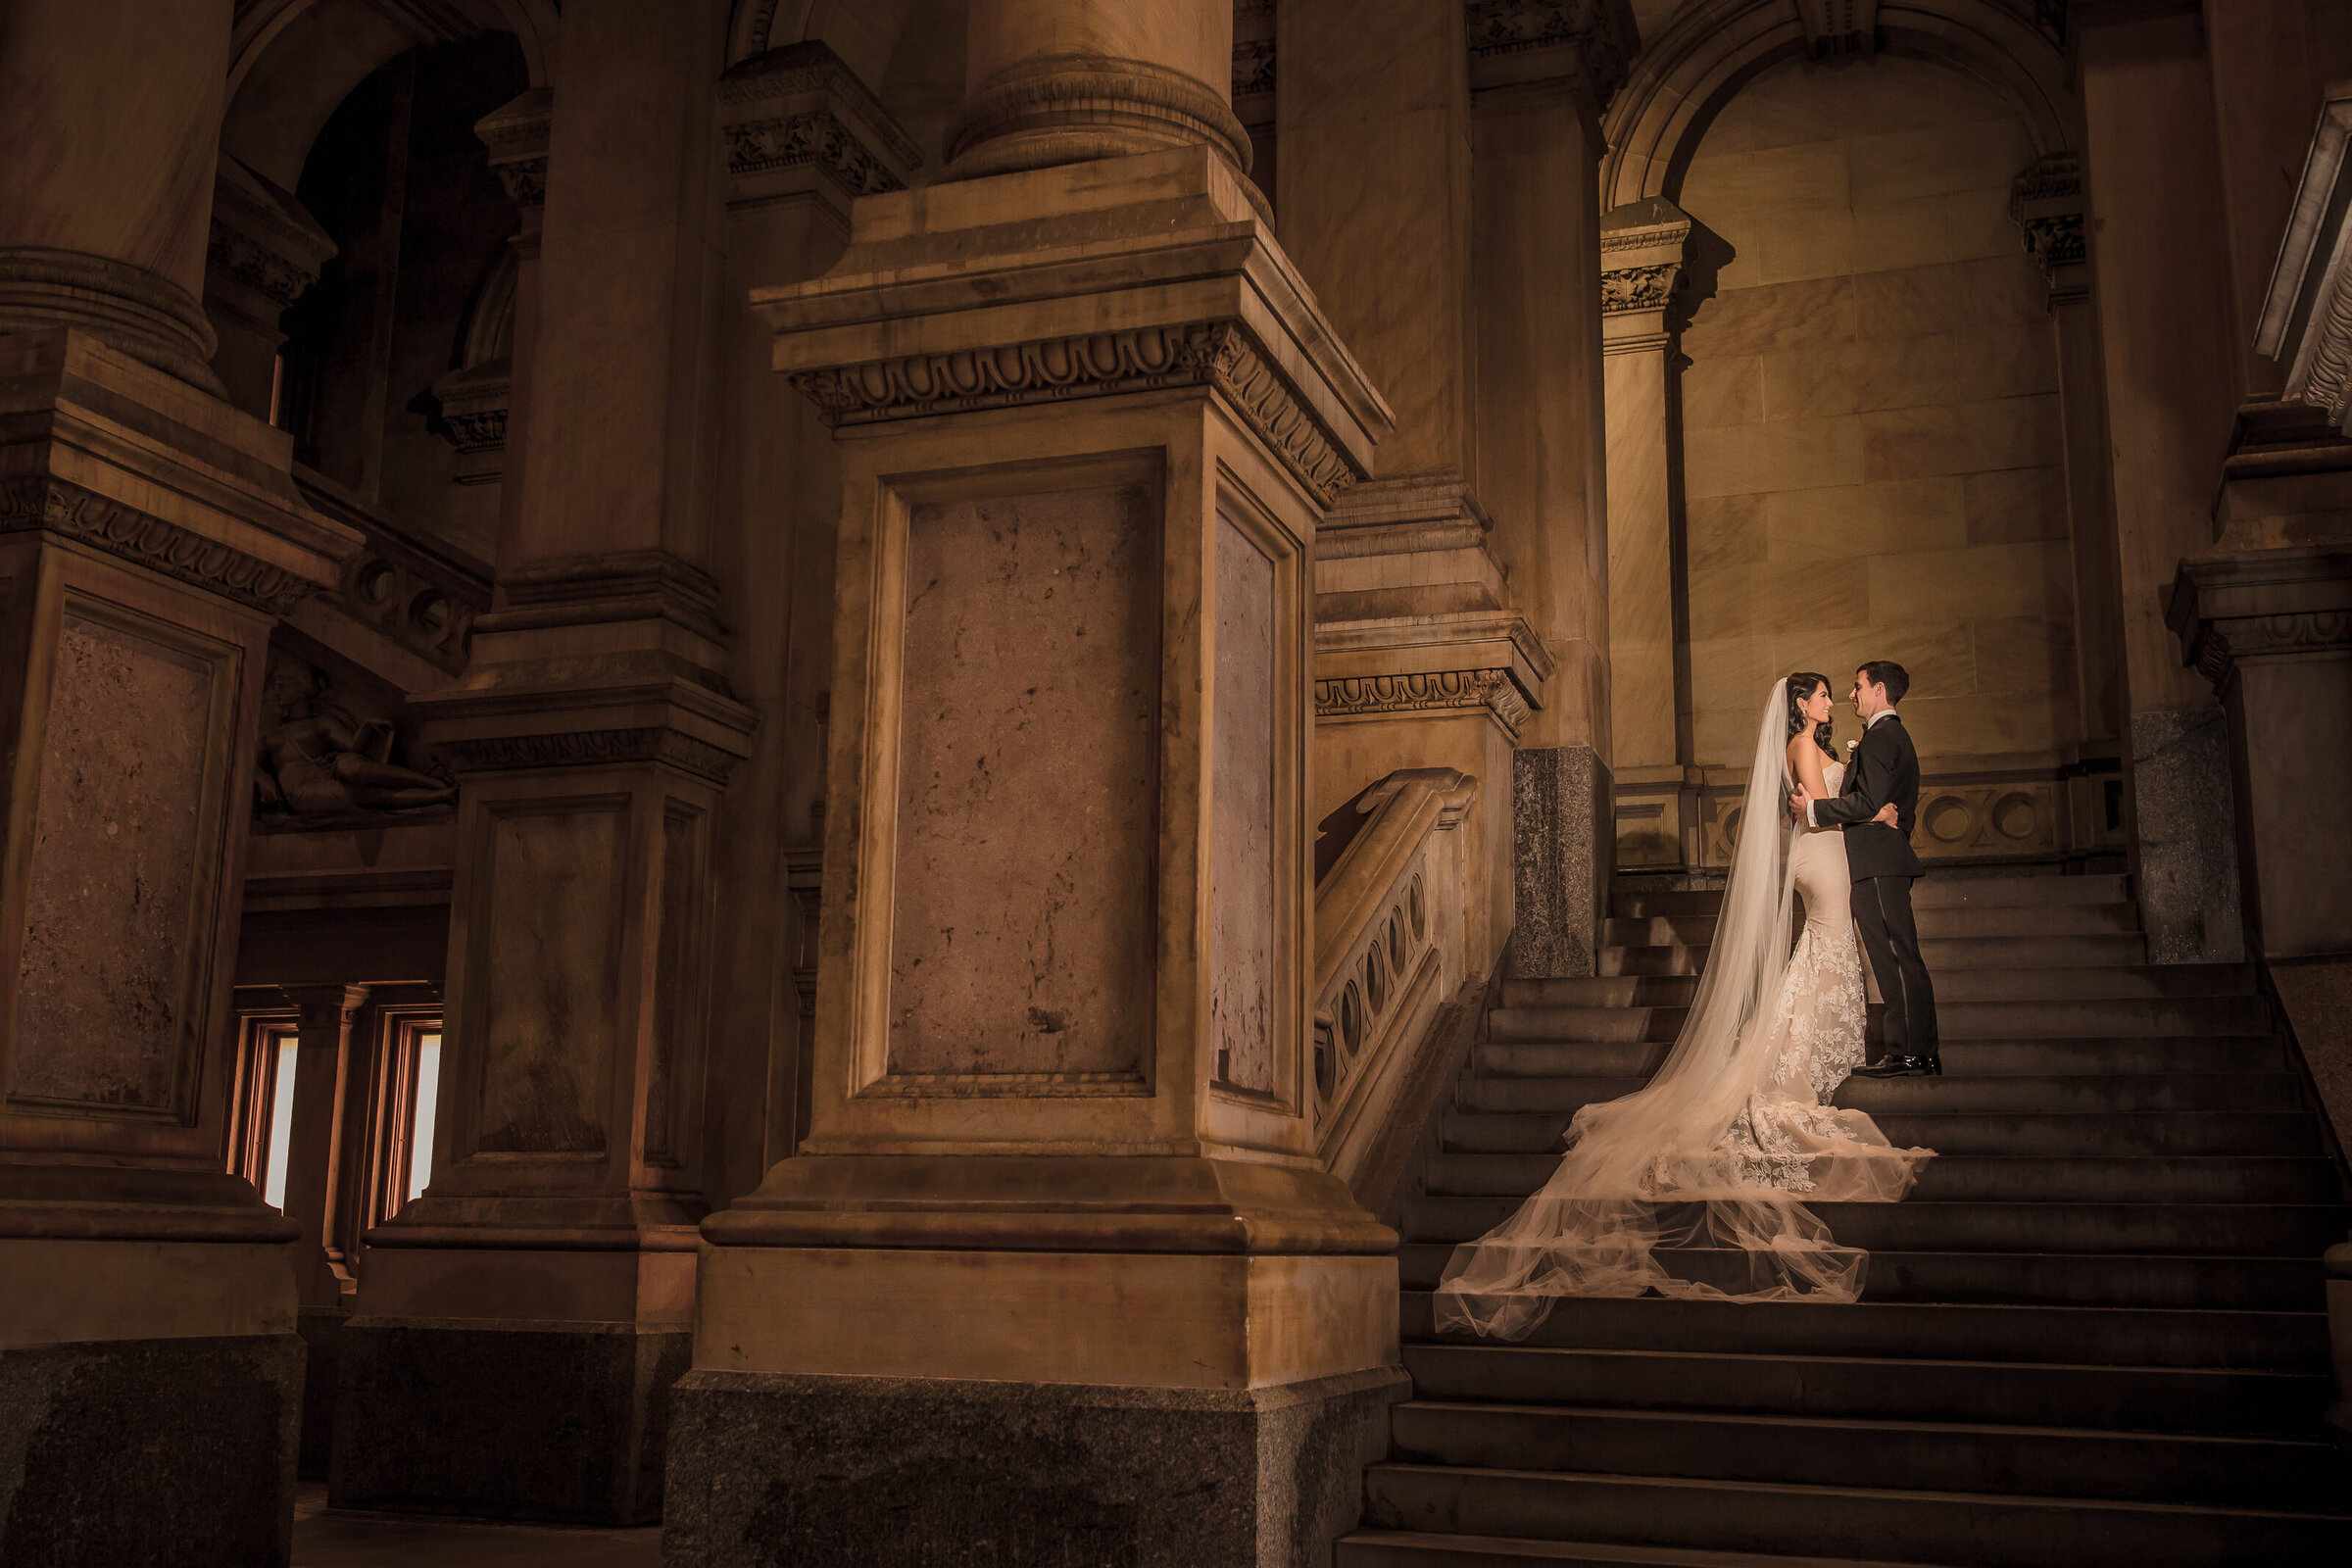 Bride with long cathedral veil and the groom embrace on the grand staircase at Philadelphia City Hall in dramatic light